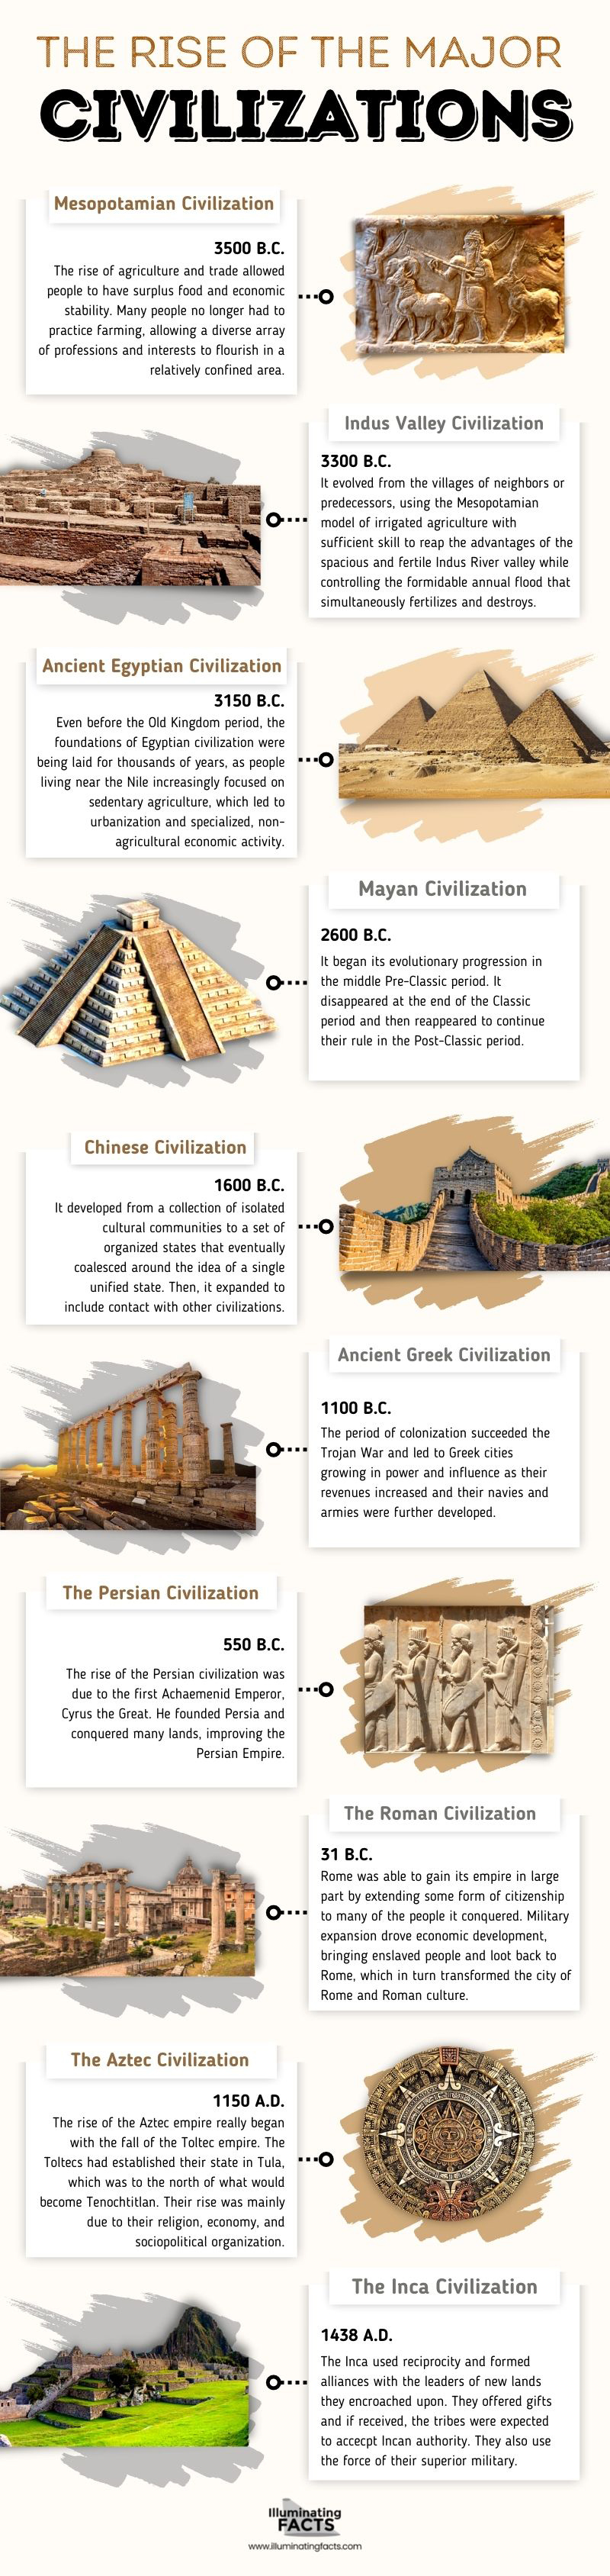 THE RISE OF THE MAJOR CIVILIZATIONS